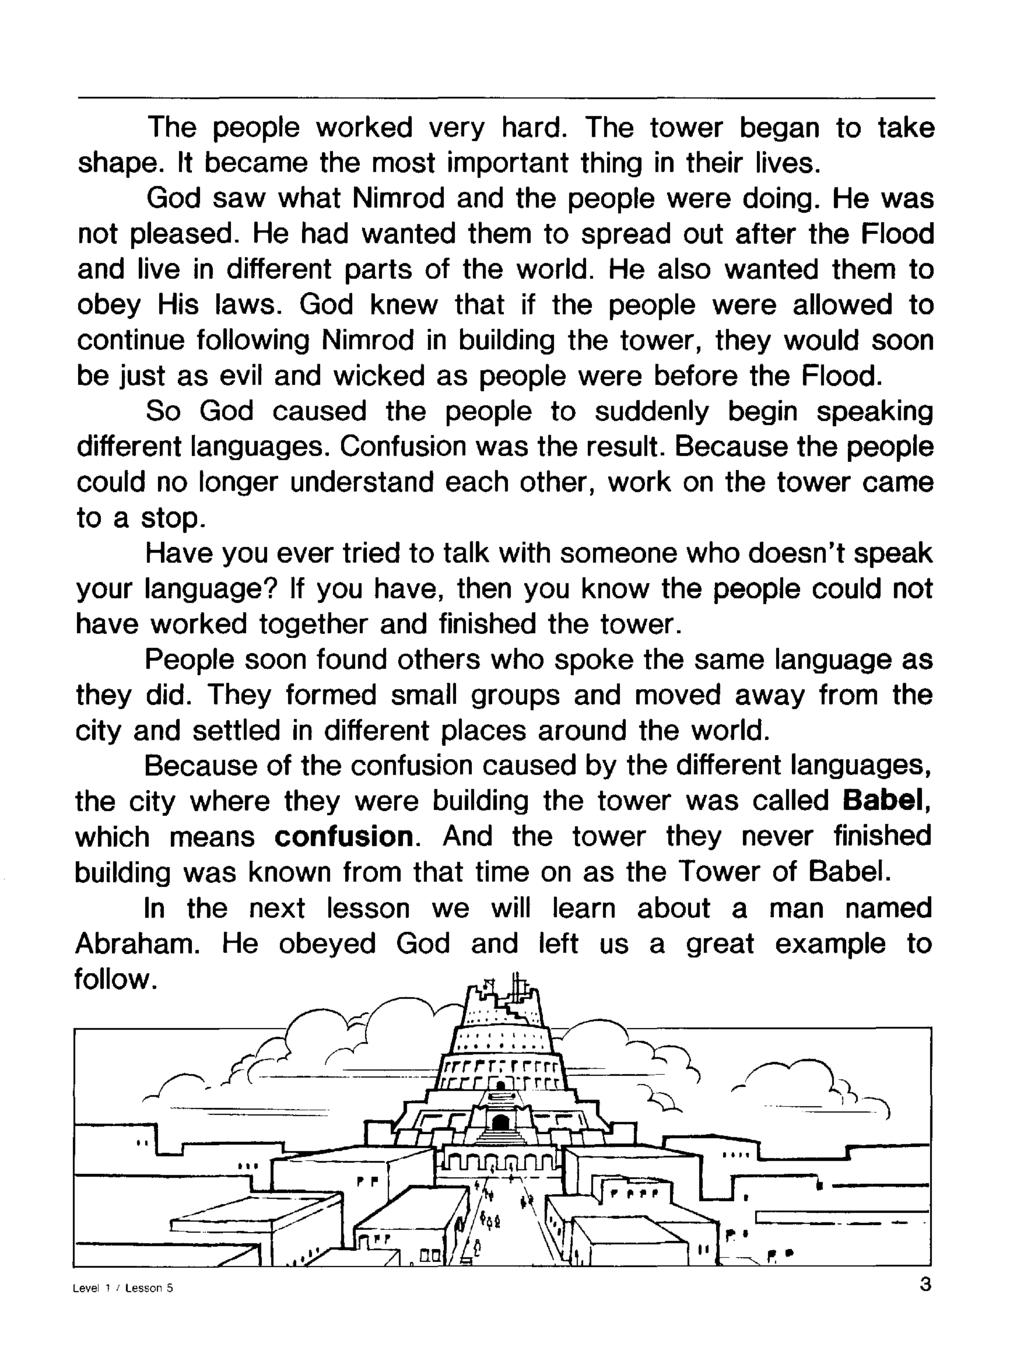 The people worked very hard. The tower began to take shape. It became the most important thing in their lives. God saw what Nimrod and the people were doing. He was not pleased.